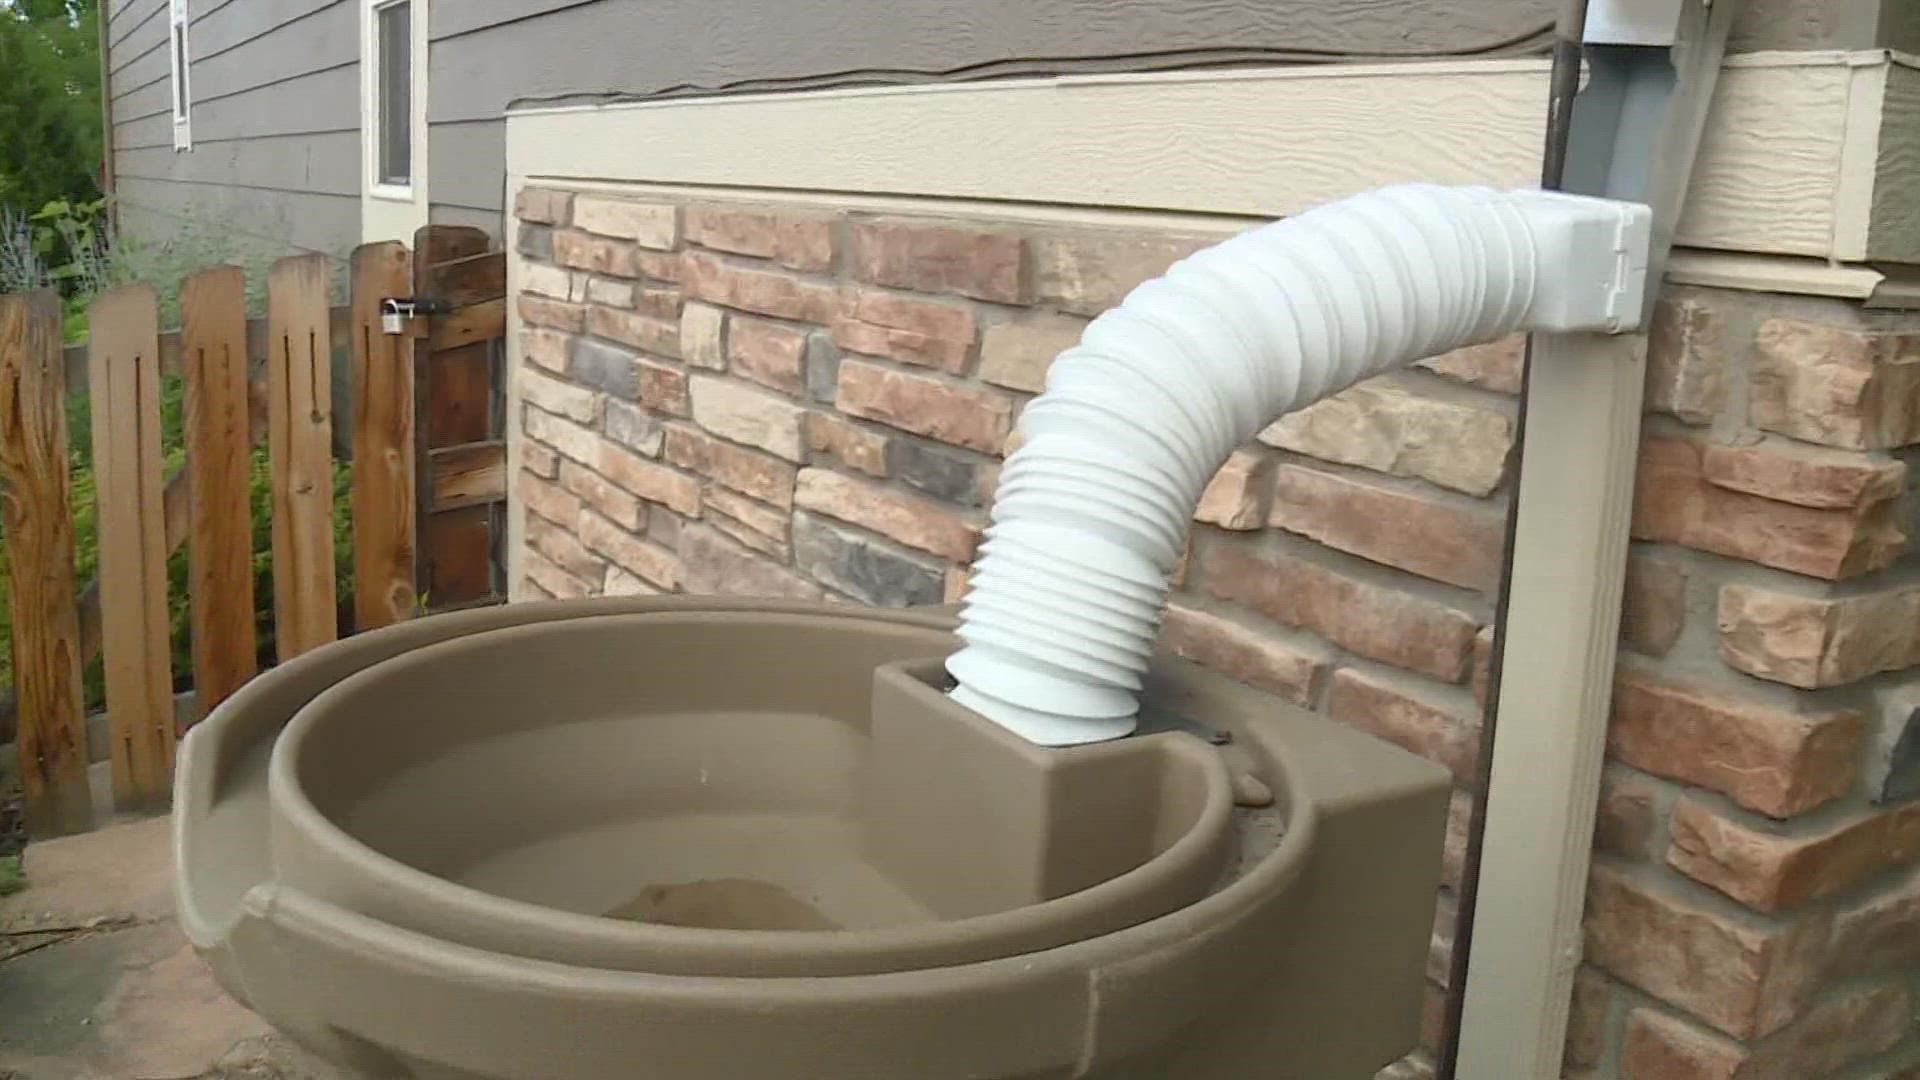 Rain barrels are not going to save you tons of money, but the water you save is priceless.